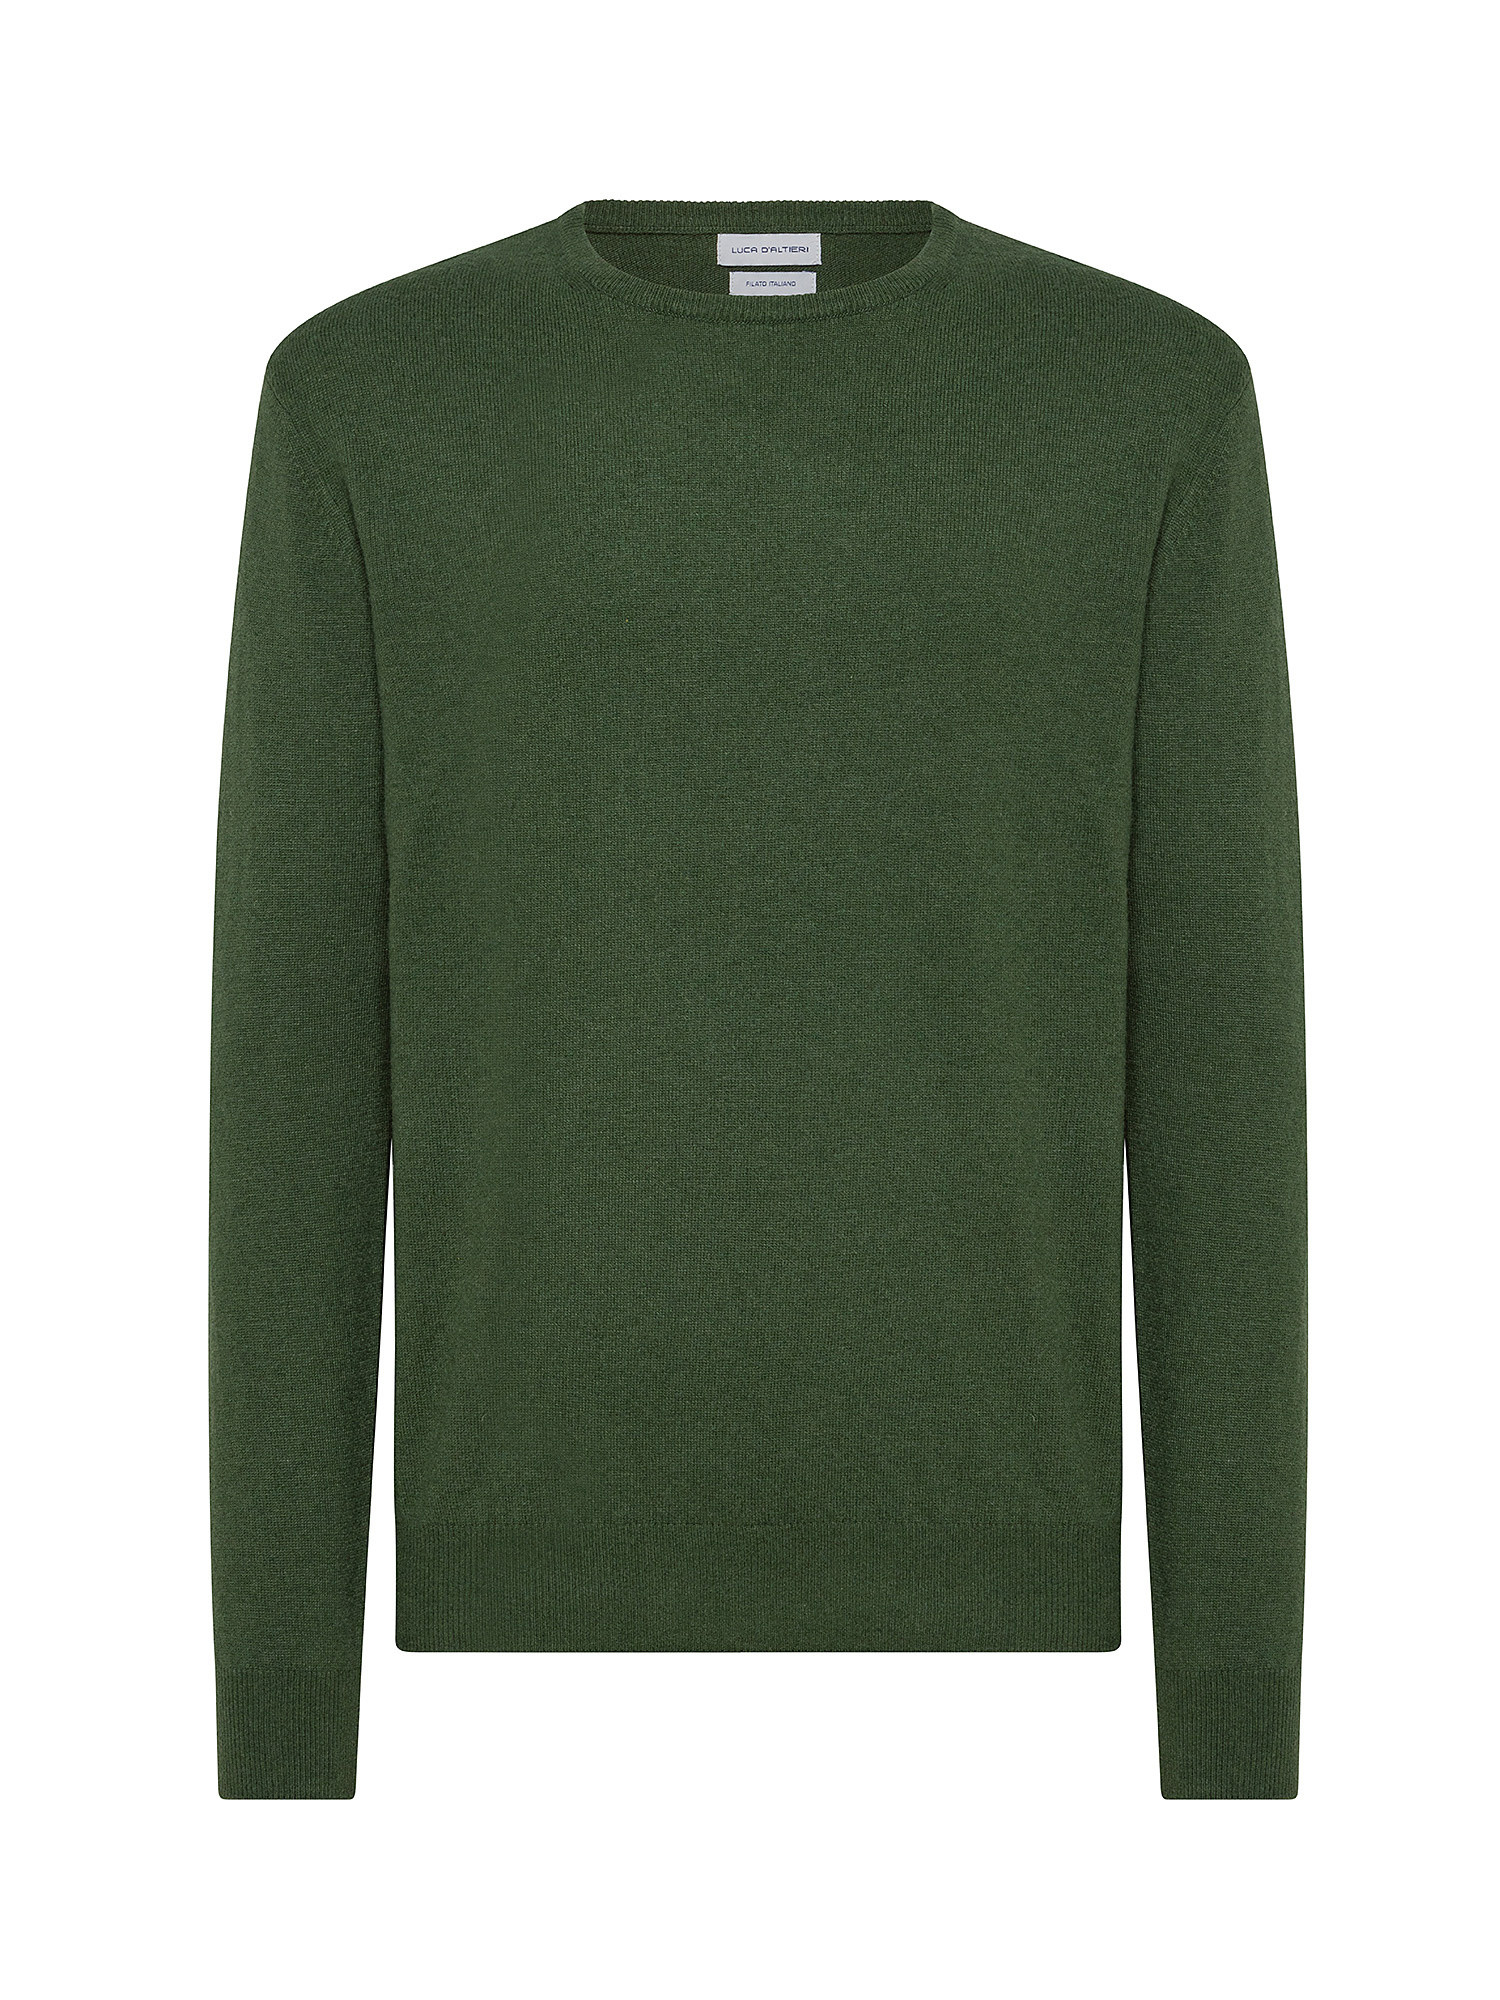 Cashmere Blend crewneck sweater with noble fibers, Olive Green, large image number 0